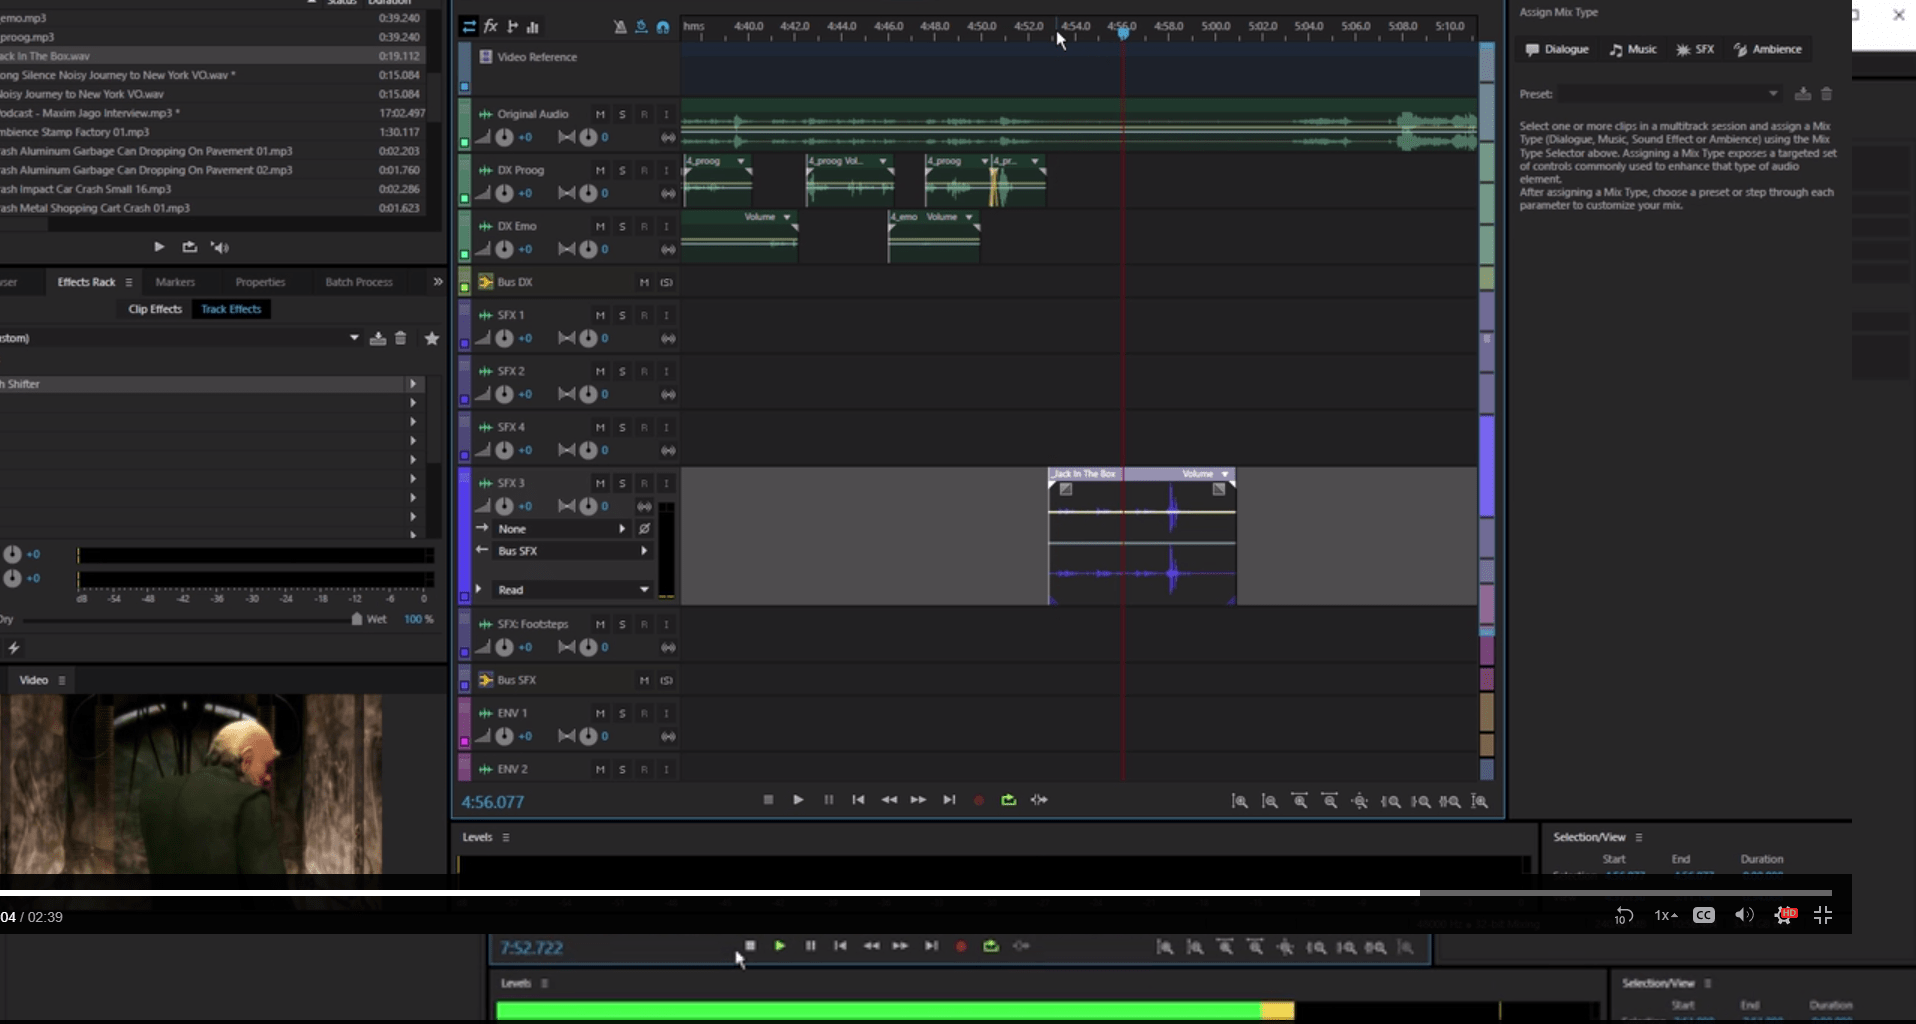 adobe audition openin graphic